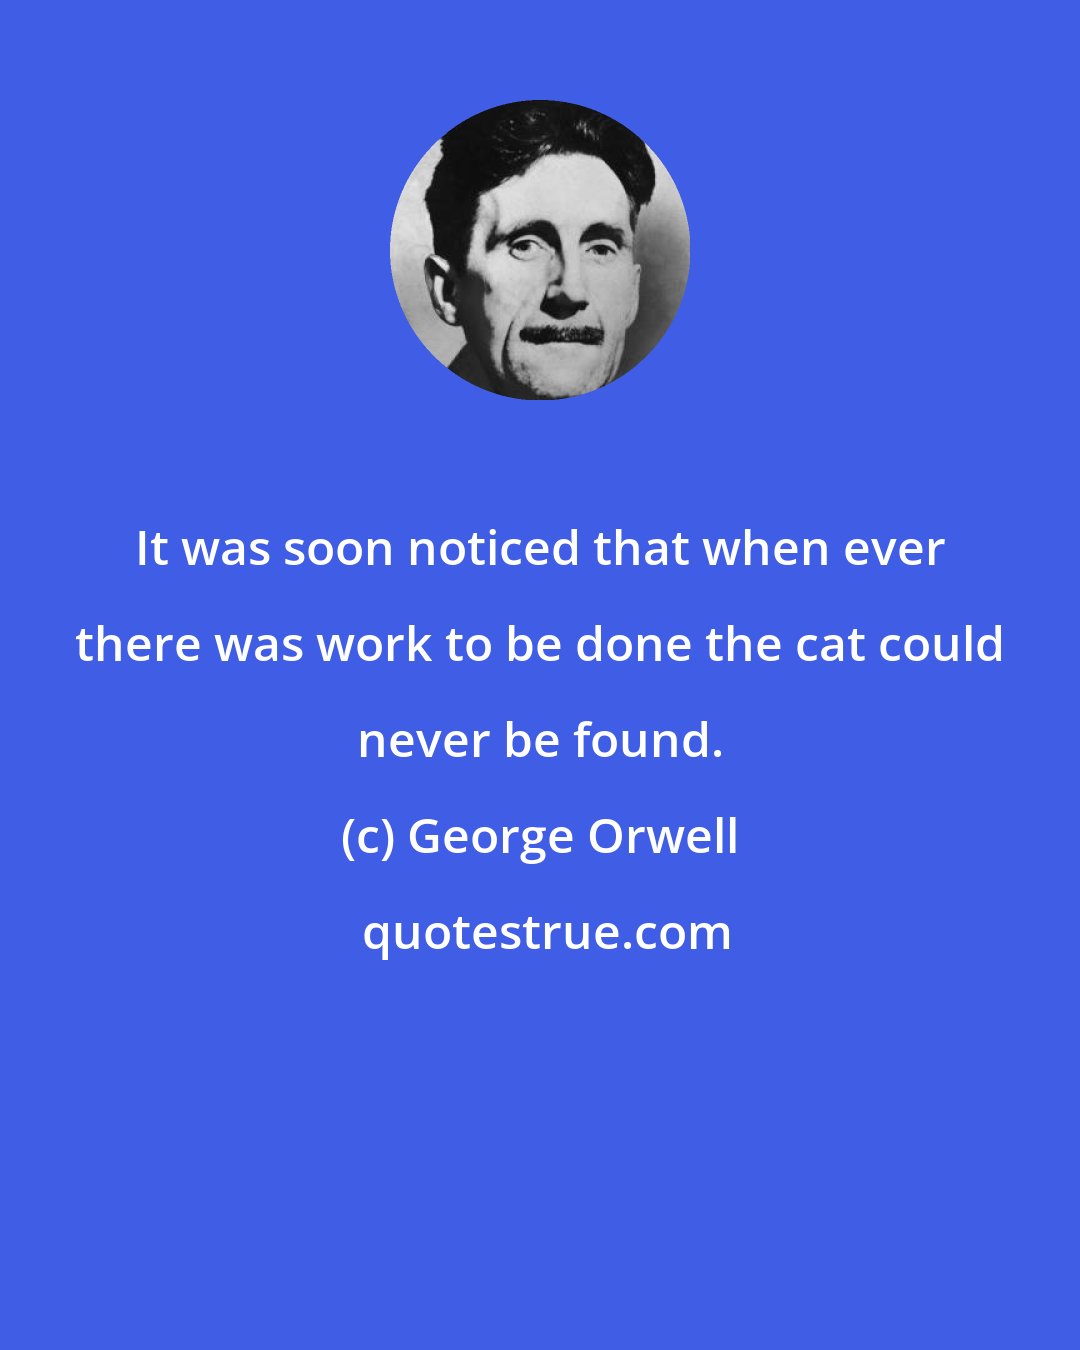 George Orwell: It was soon noticed that when ever there was work to be done the cat could never be found.